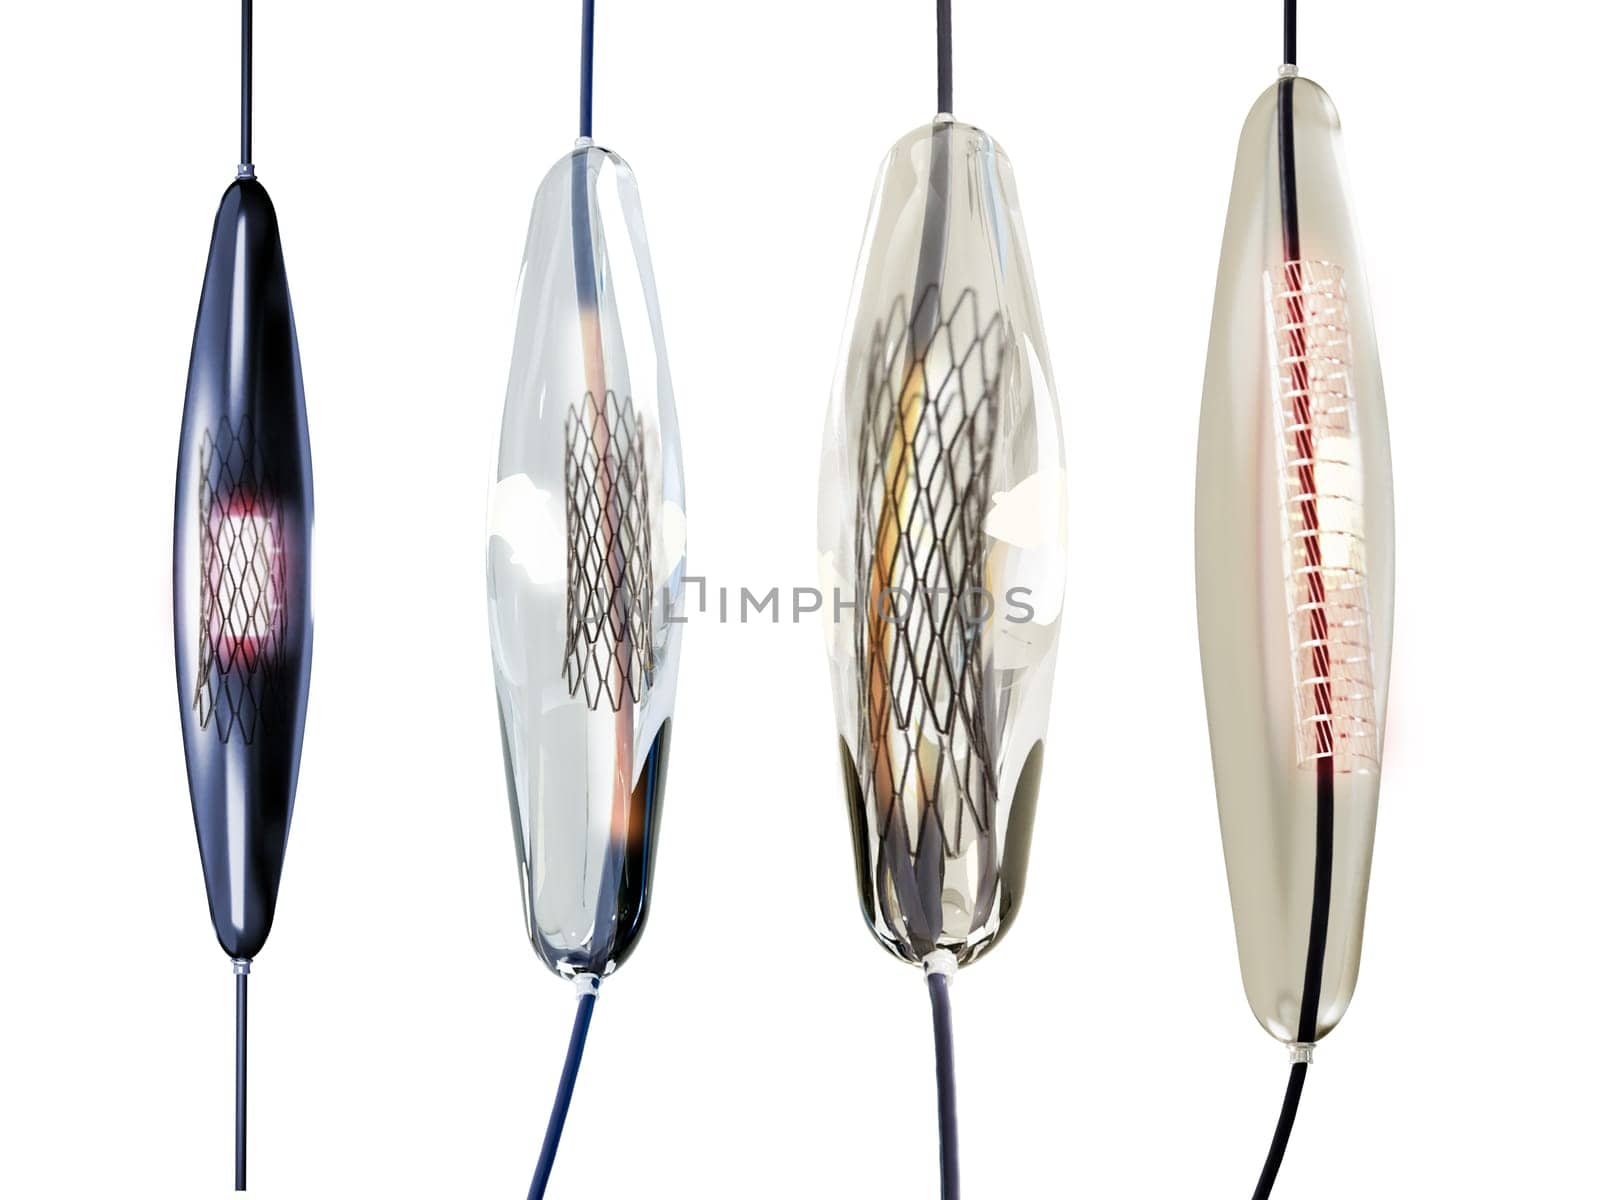 mesh metal nitinol self-expandable stent 3D rendering for endovascular surgery isolated on white background. Clipping path.